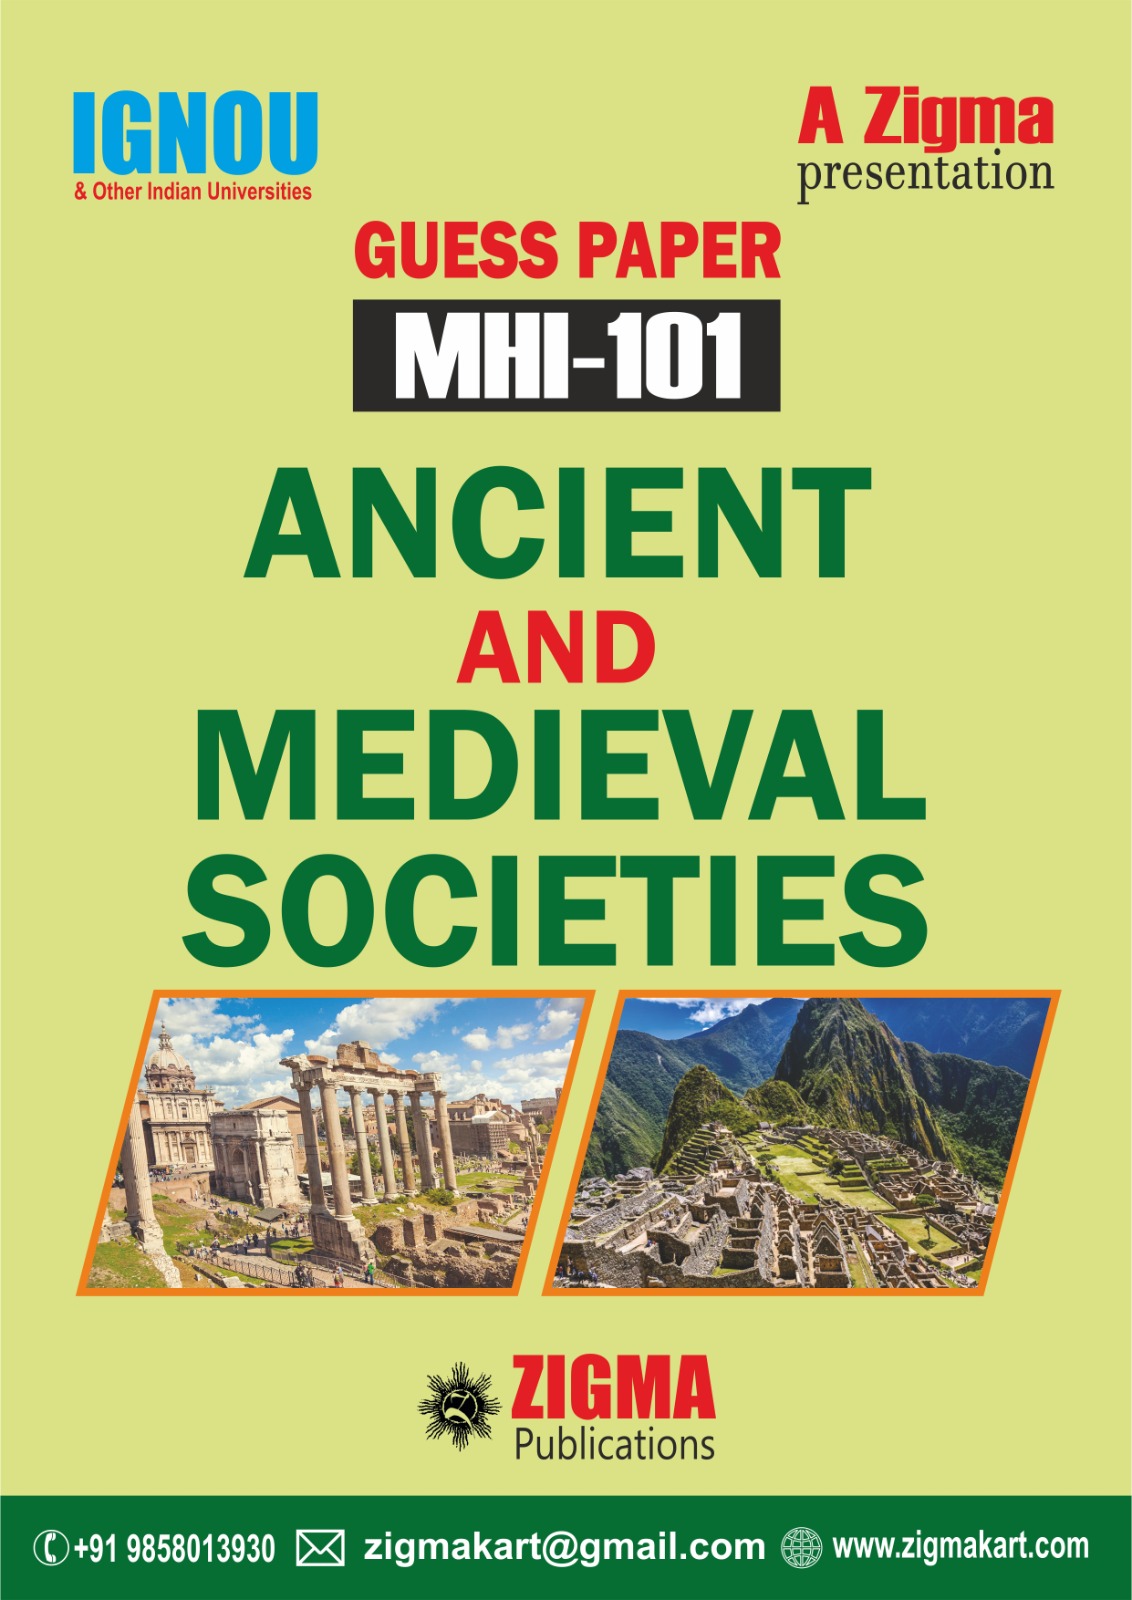 Guess Paper IGNOU MHI-101 Ancient and Medieval Societies